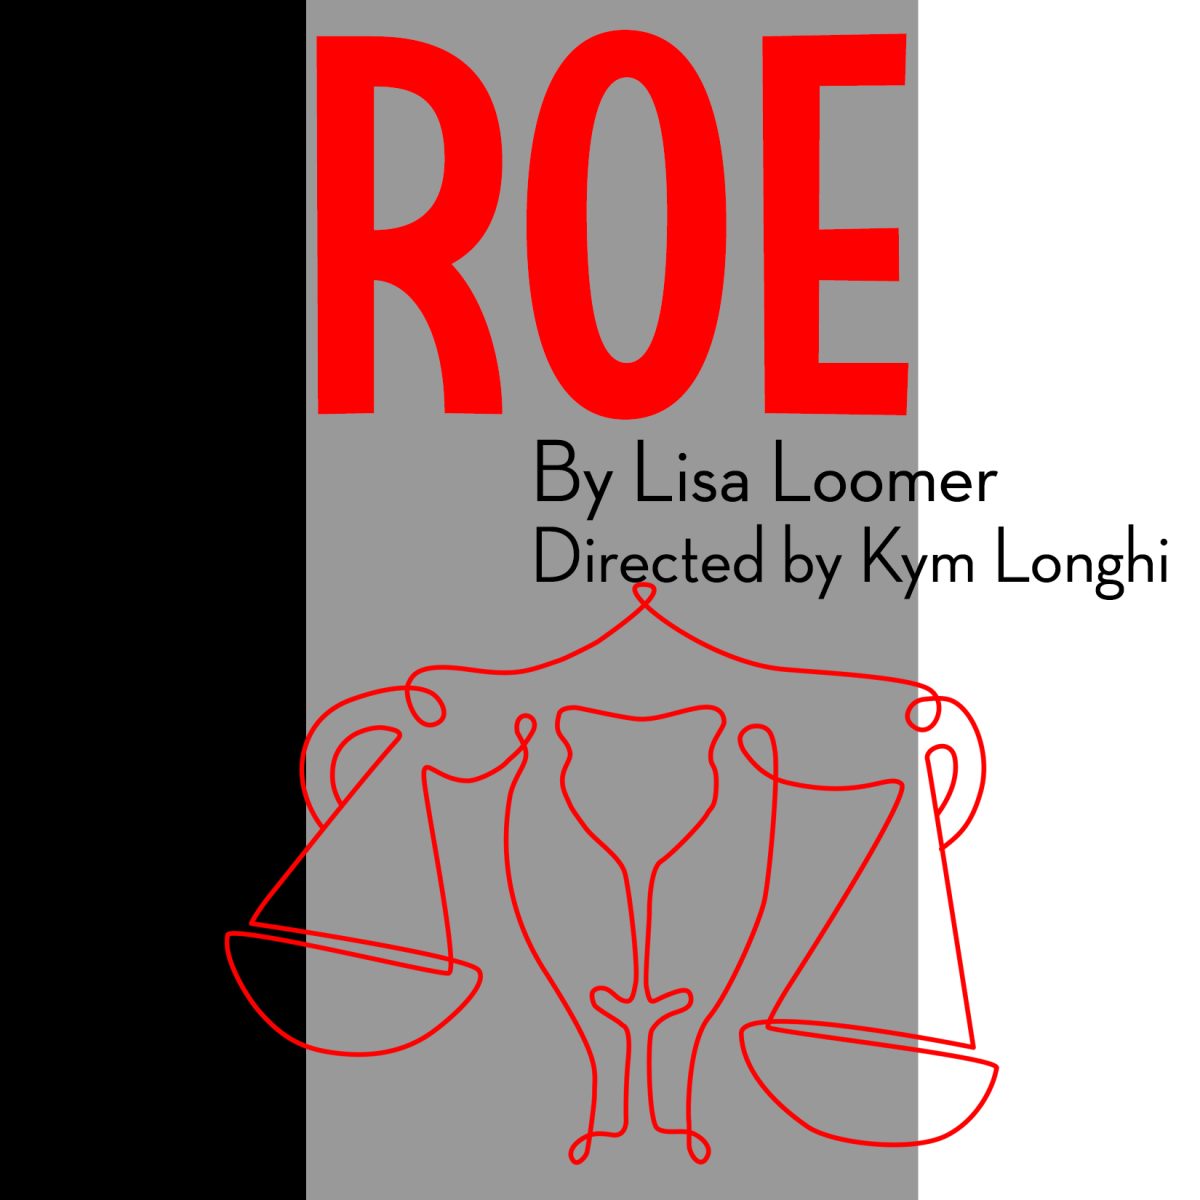 “Roe” follows Norma McCorvey, Sarah Weddington and the polarization and passion related to the issue.